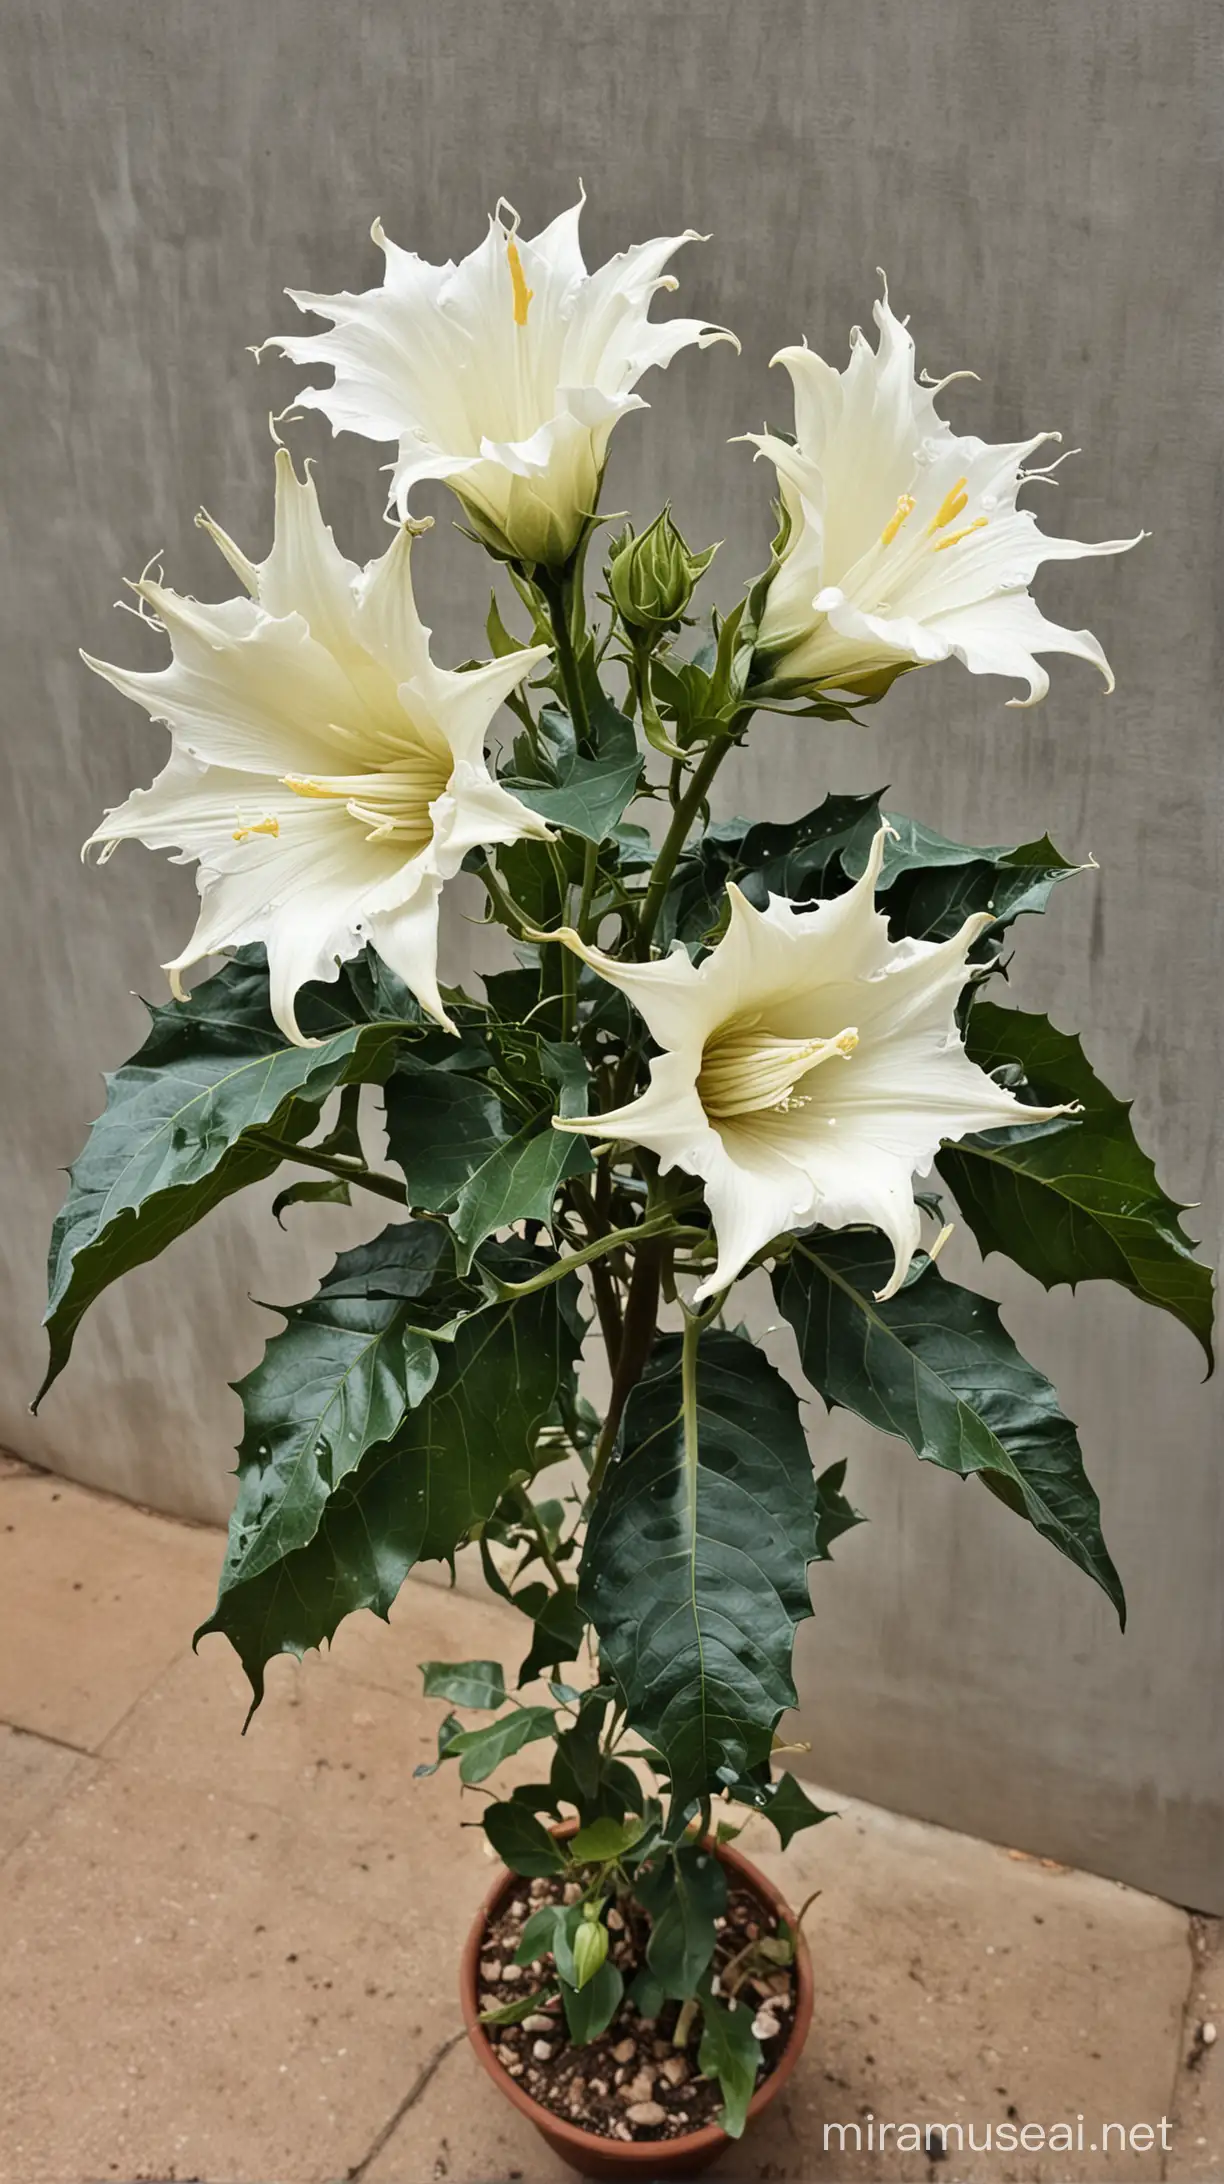 Vibrant South African Datura Plant in Full Bloom